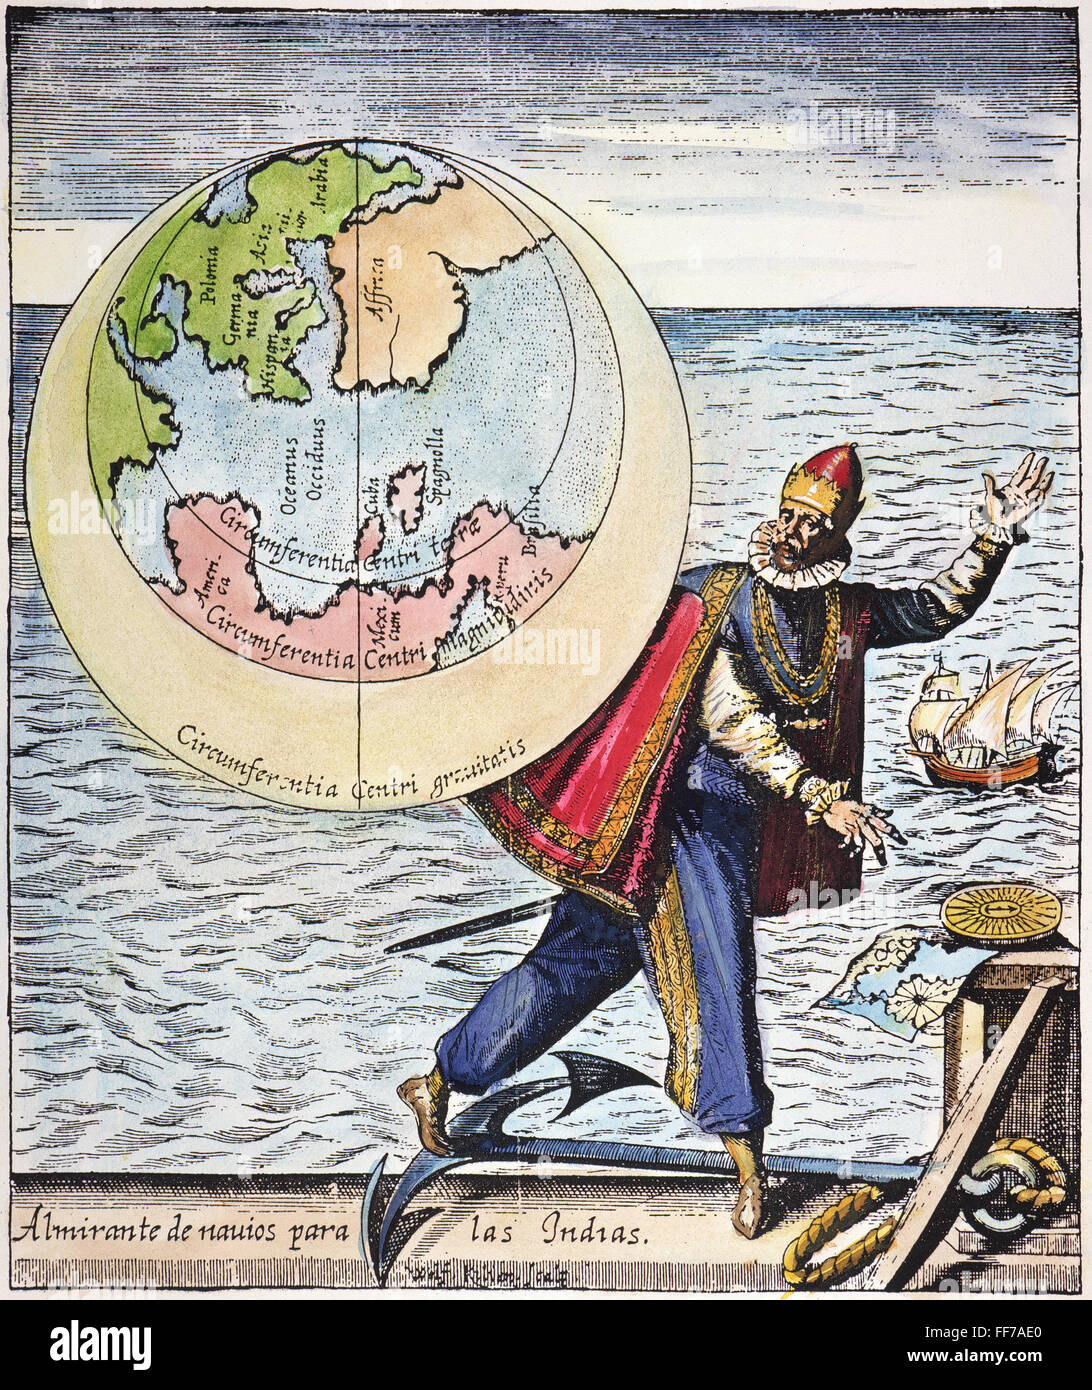 COLUMBUS: TRIBUTE, 1621. /nAllegorical tribute to Christopher Columbus and his discovery of the New World, including 'America' and Spagniolla' as shown on the accompanying map: German engraving, 1621. Stock Photo